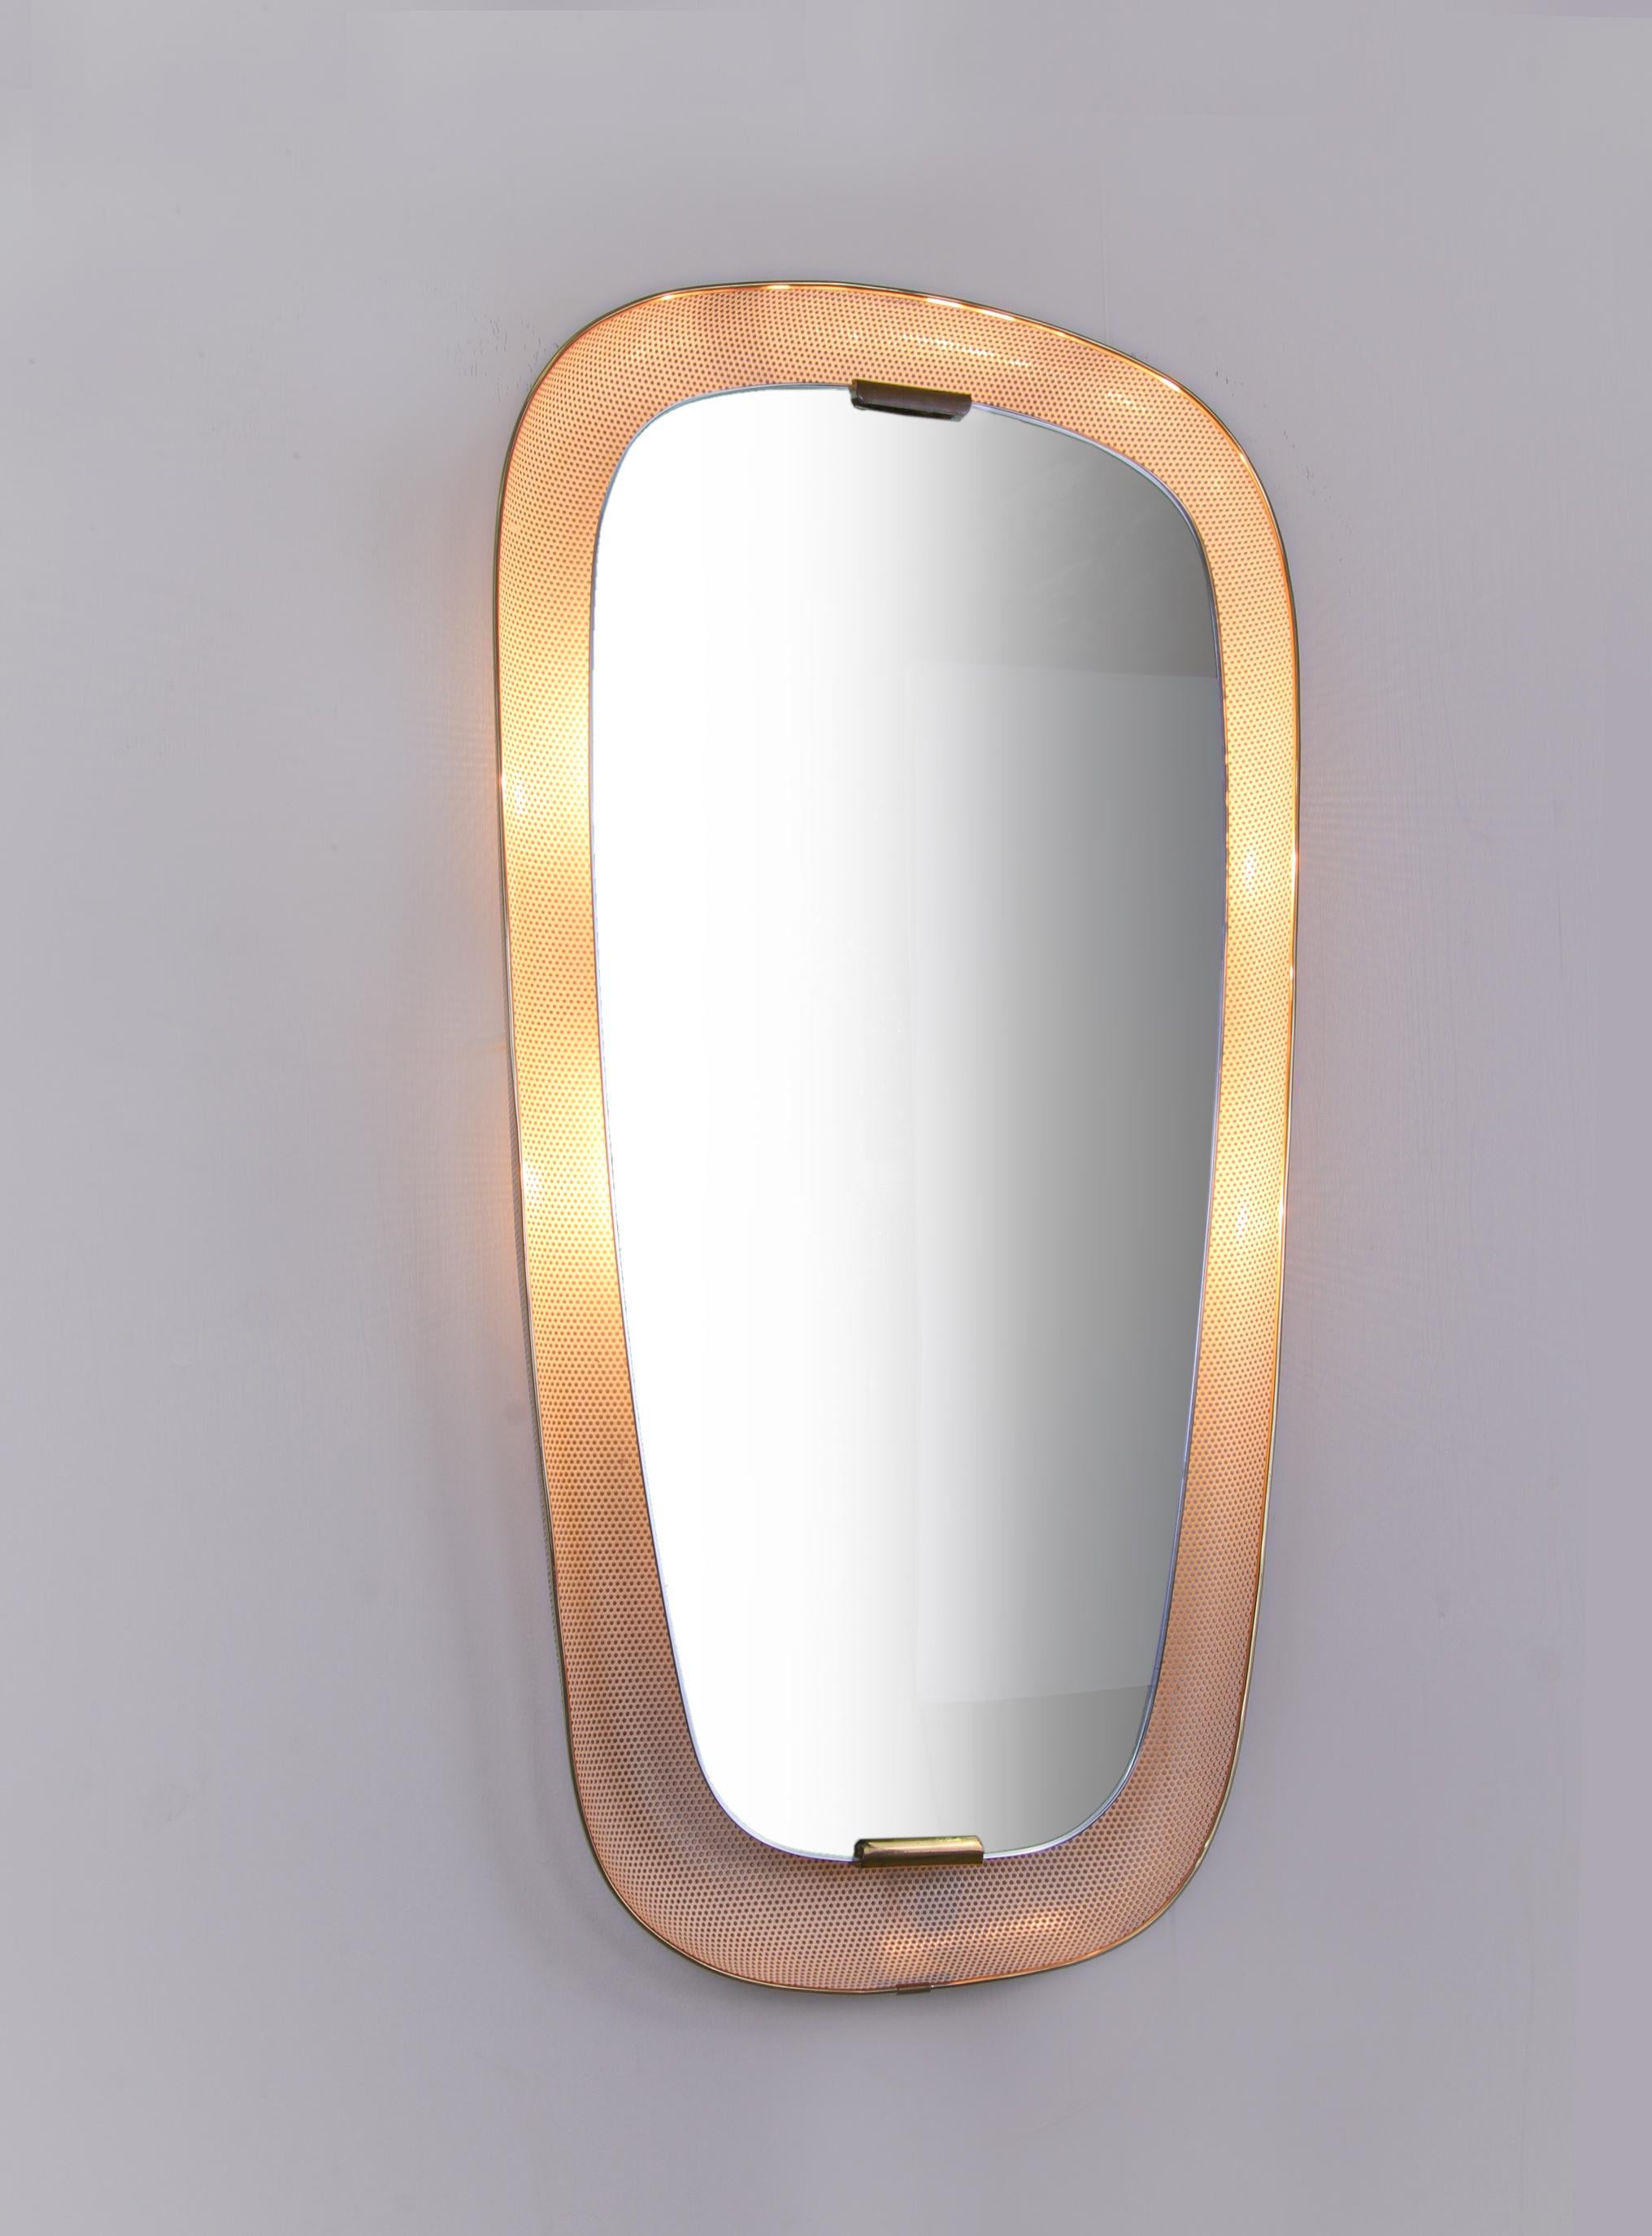 Elegant wall mirror with illuminated background. Manufactured in Germany, 1950s. 
 
The frame is made of perforated sheet metal with brass hardware. 
 
Measures: height 31.9” in. (81 cm), width 16.5” in. (42 cm), depth 2.75” in. (7 cm). 
Lighting: